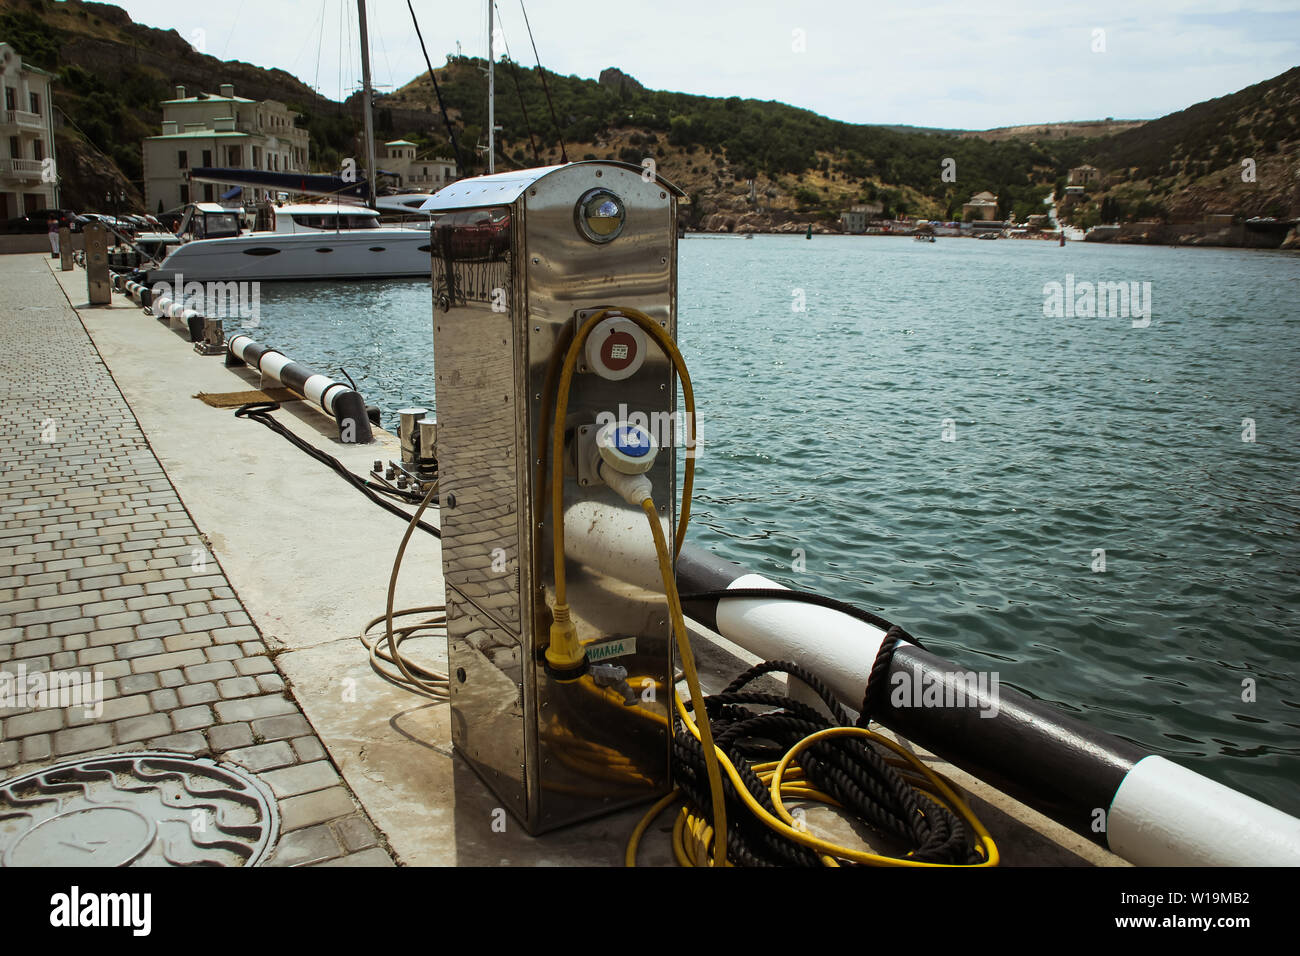 Balaklava, Russia - june 26, 2019: Electricity and water station in yacht harbor. Charging station for boats, electrical outlets in harbor. Electrical Stock Photo